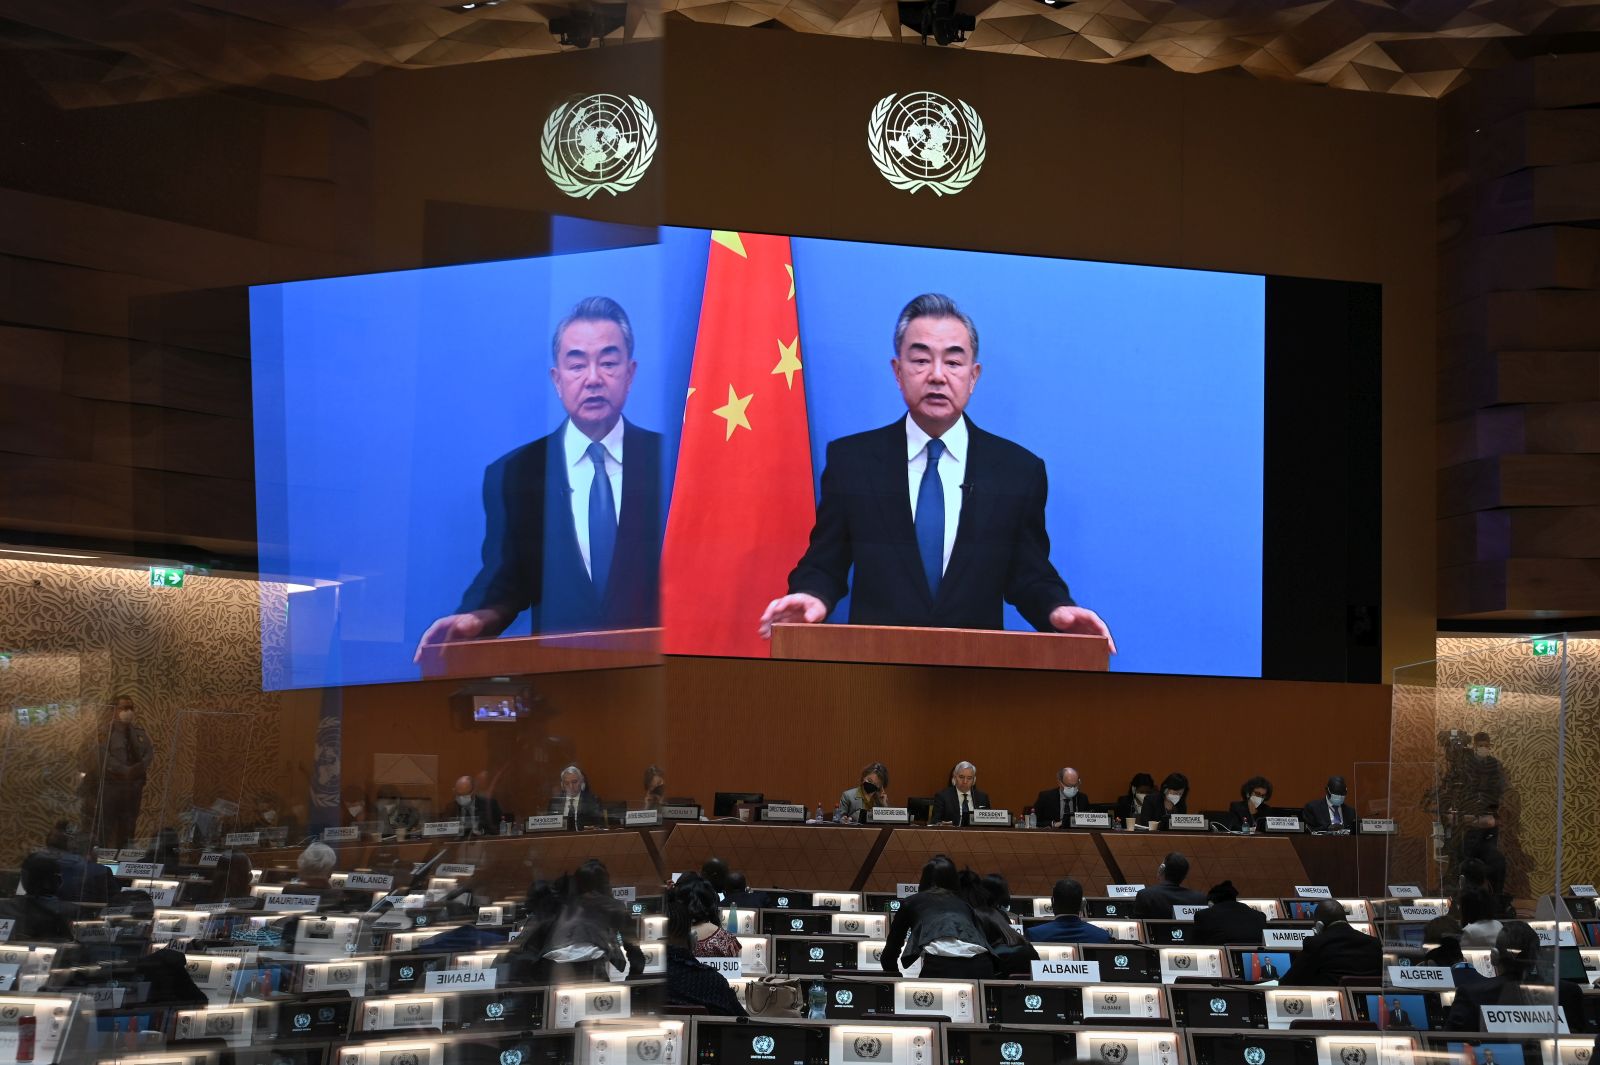 epa09791298 Chinese Foreign minister Wang Yi appears on a screen as he delivers a remote speech at the opening of the 49th session of the UN Human Rights Council in Geneva, Switzerland,  28 February 2022. The UN Human Rights Council voted to hold an urgent debate about Russia's invasion of Ukraine at Kyiv's request, amid widespread international condemnation of Russia's attack.  EPA/FABRICE COFFRINI / POOL